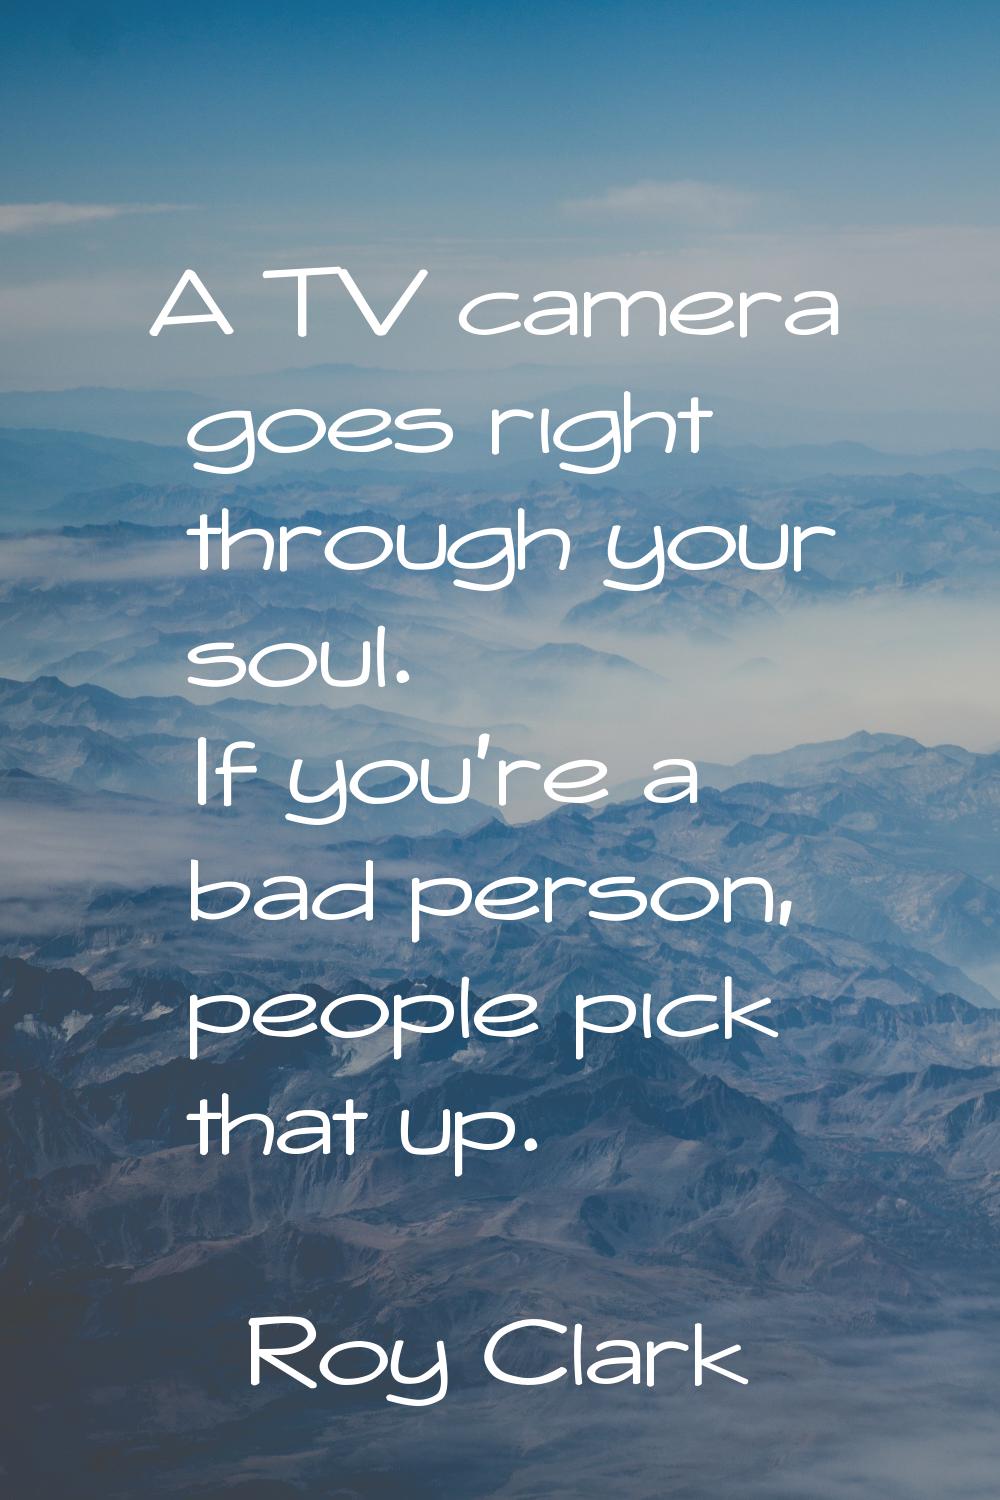 A TV camera goes right through your soul. If you're a bad person, people pick that up.